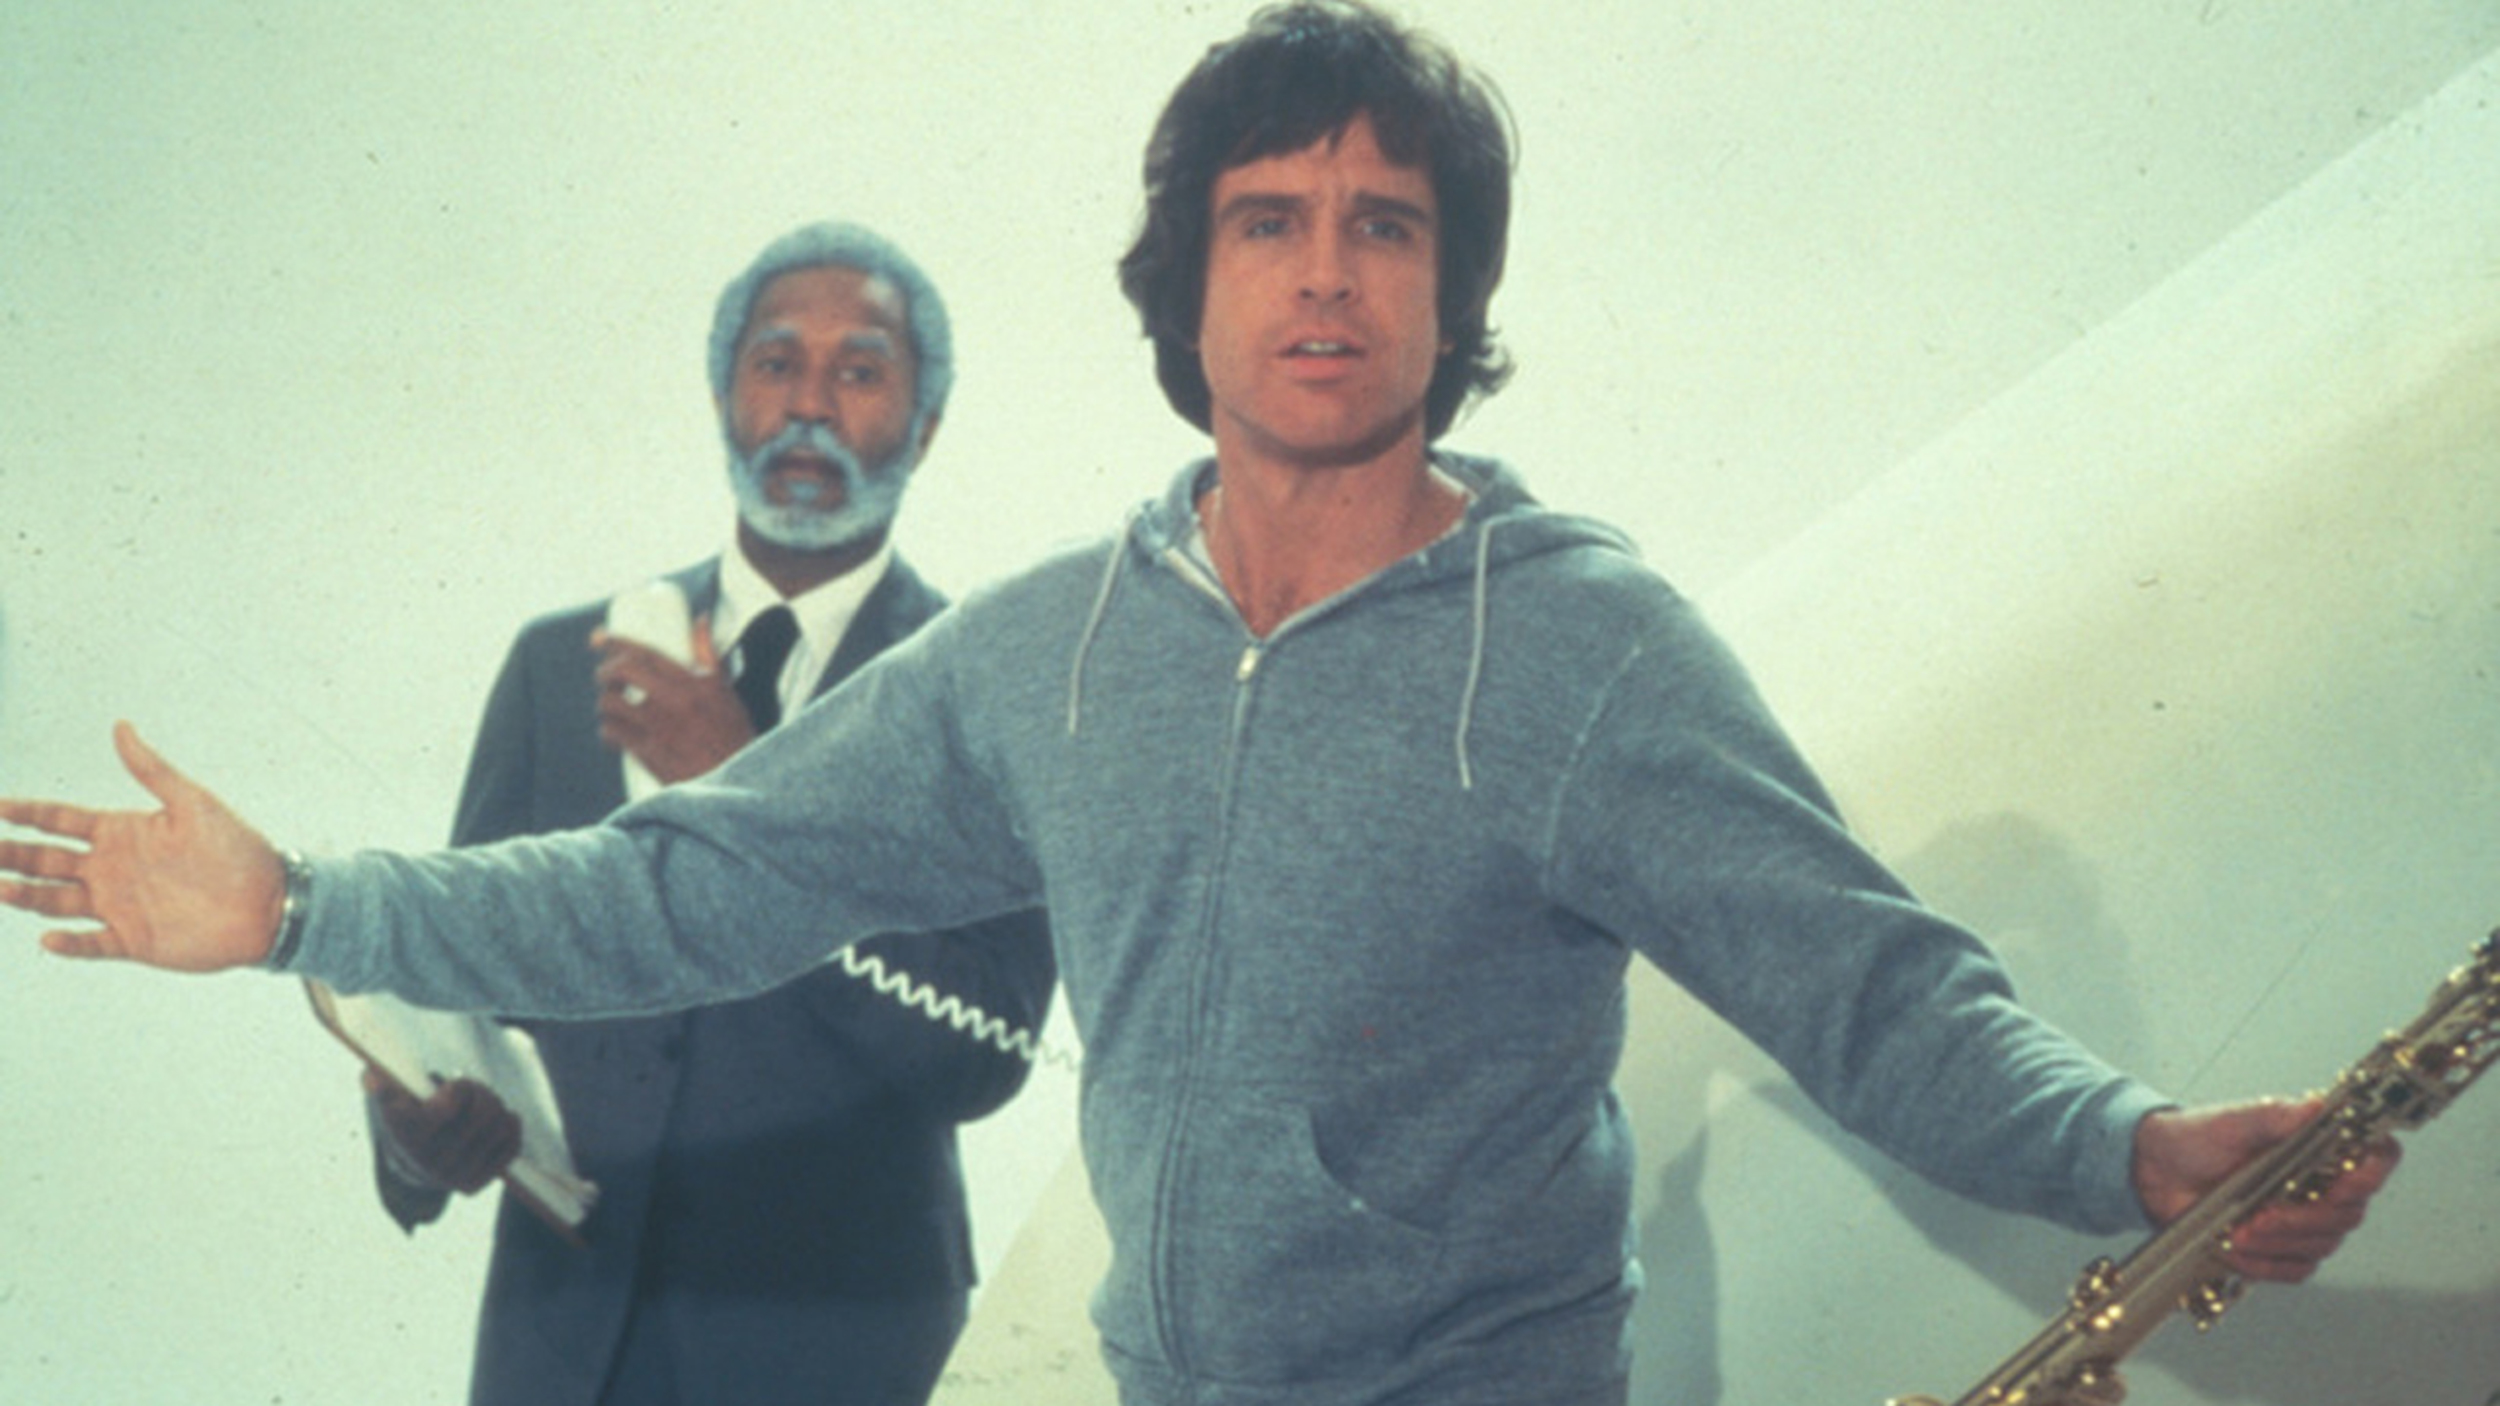 <p>Warren Beatty liked to have creative control over his projects. “Heaven Can Wait” was no different. He co-wrote with Elaine May and also co-directed with Buck Henry. Beatty plays an NFL quarterback who dies in a mix-up, so angels send him back to Earth into the body of a millionaire. For a sports film, this one was critically acclaimed. It was nominated for nine Oscars.</p><p><a href='https://www.msn.com/en-us/community/channel/vid-cj9pqbr0vn9in2b6ddcd8sfgpfq6x6utp44fssrv6mc2gtybw0us'>Follow us on MSN to see more of our exclusive entertainment content.</a></p>